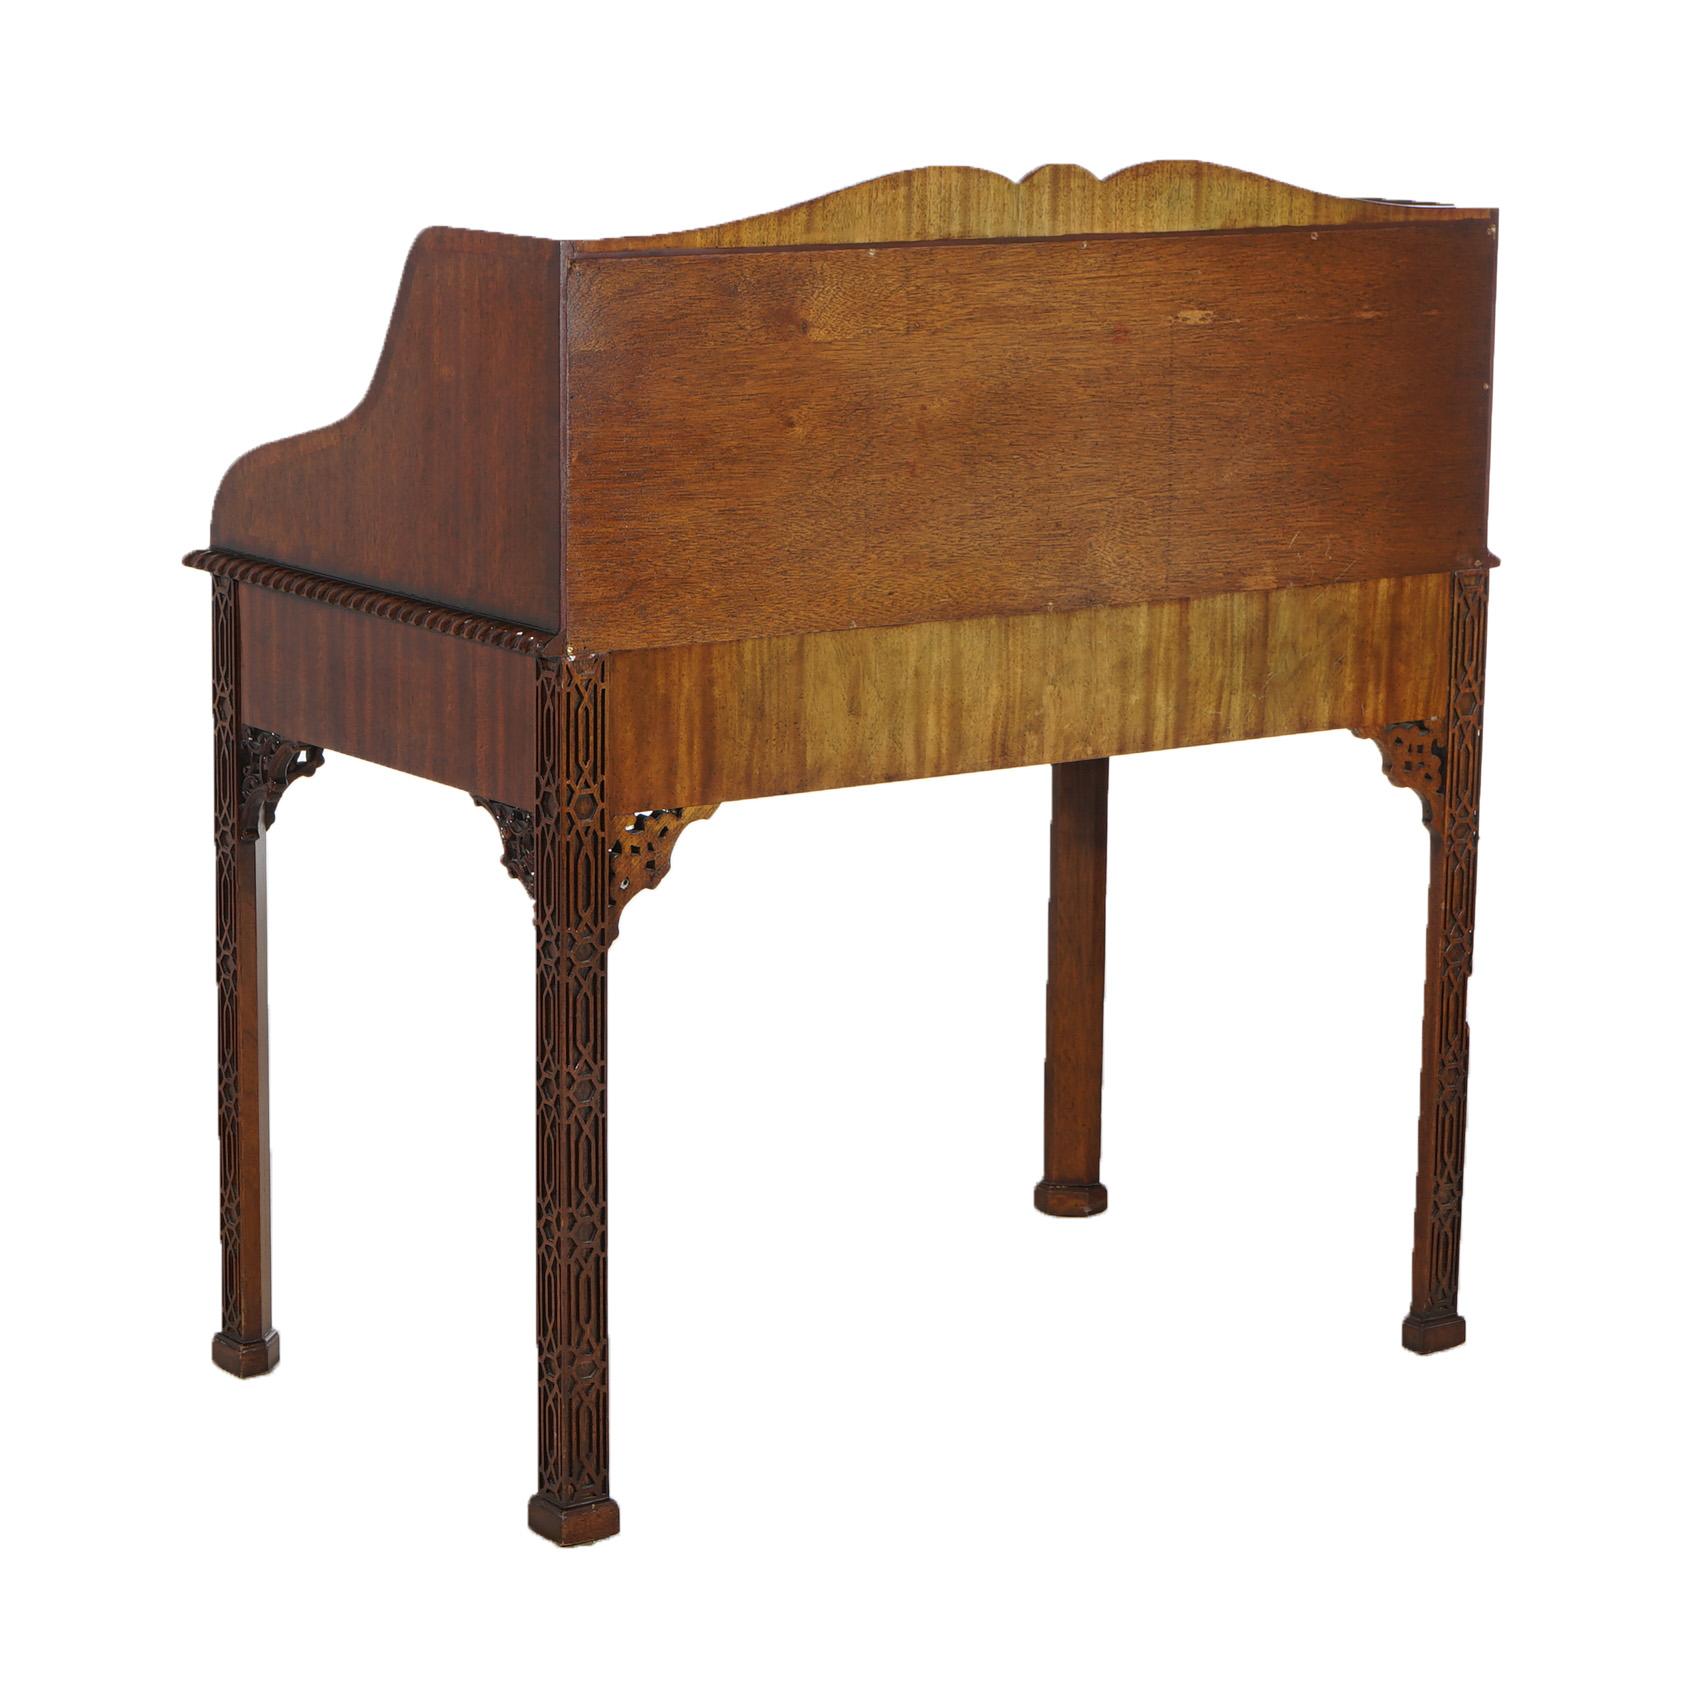 Maitland Smith Carved Mahogany Chinese Chippendale Style Carlton Desk Set c1940 For Sale 3